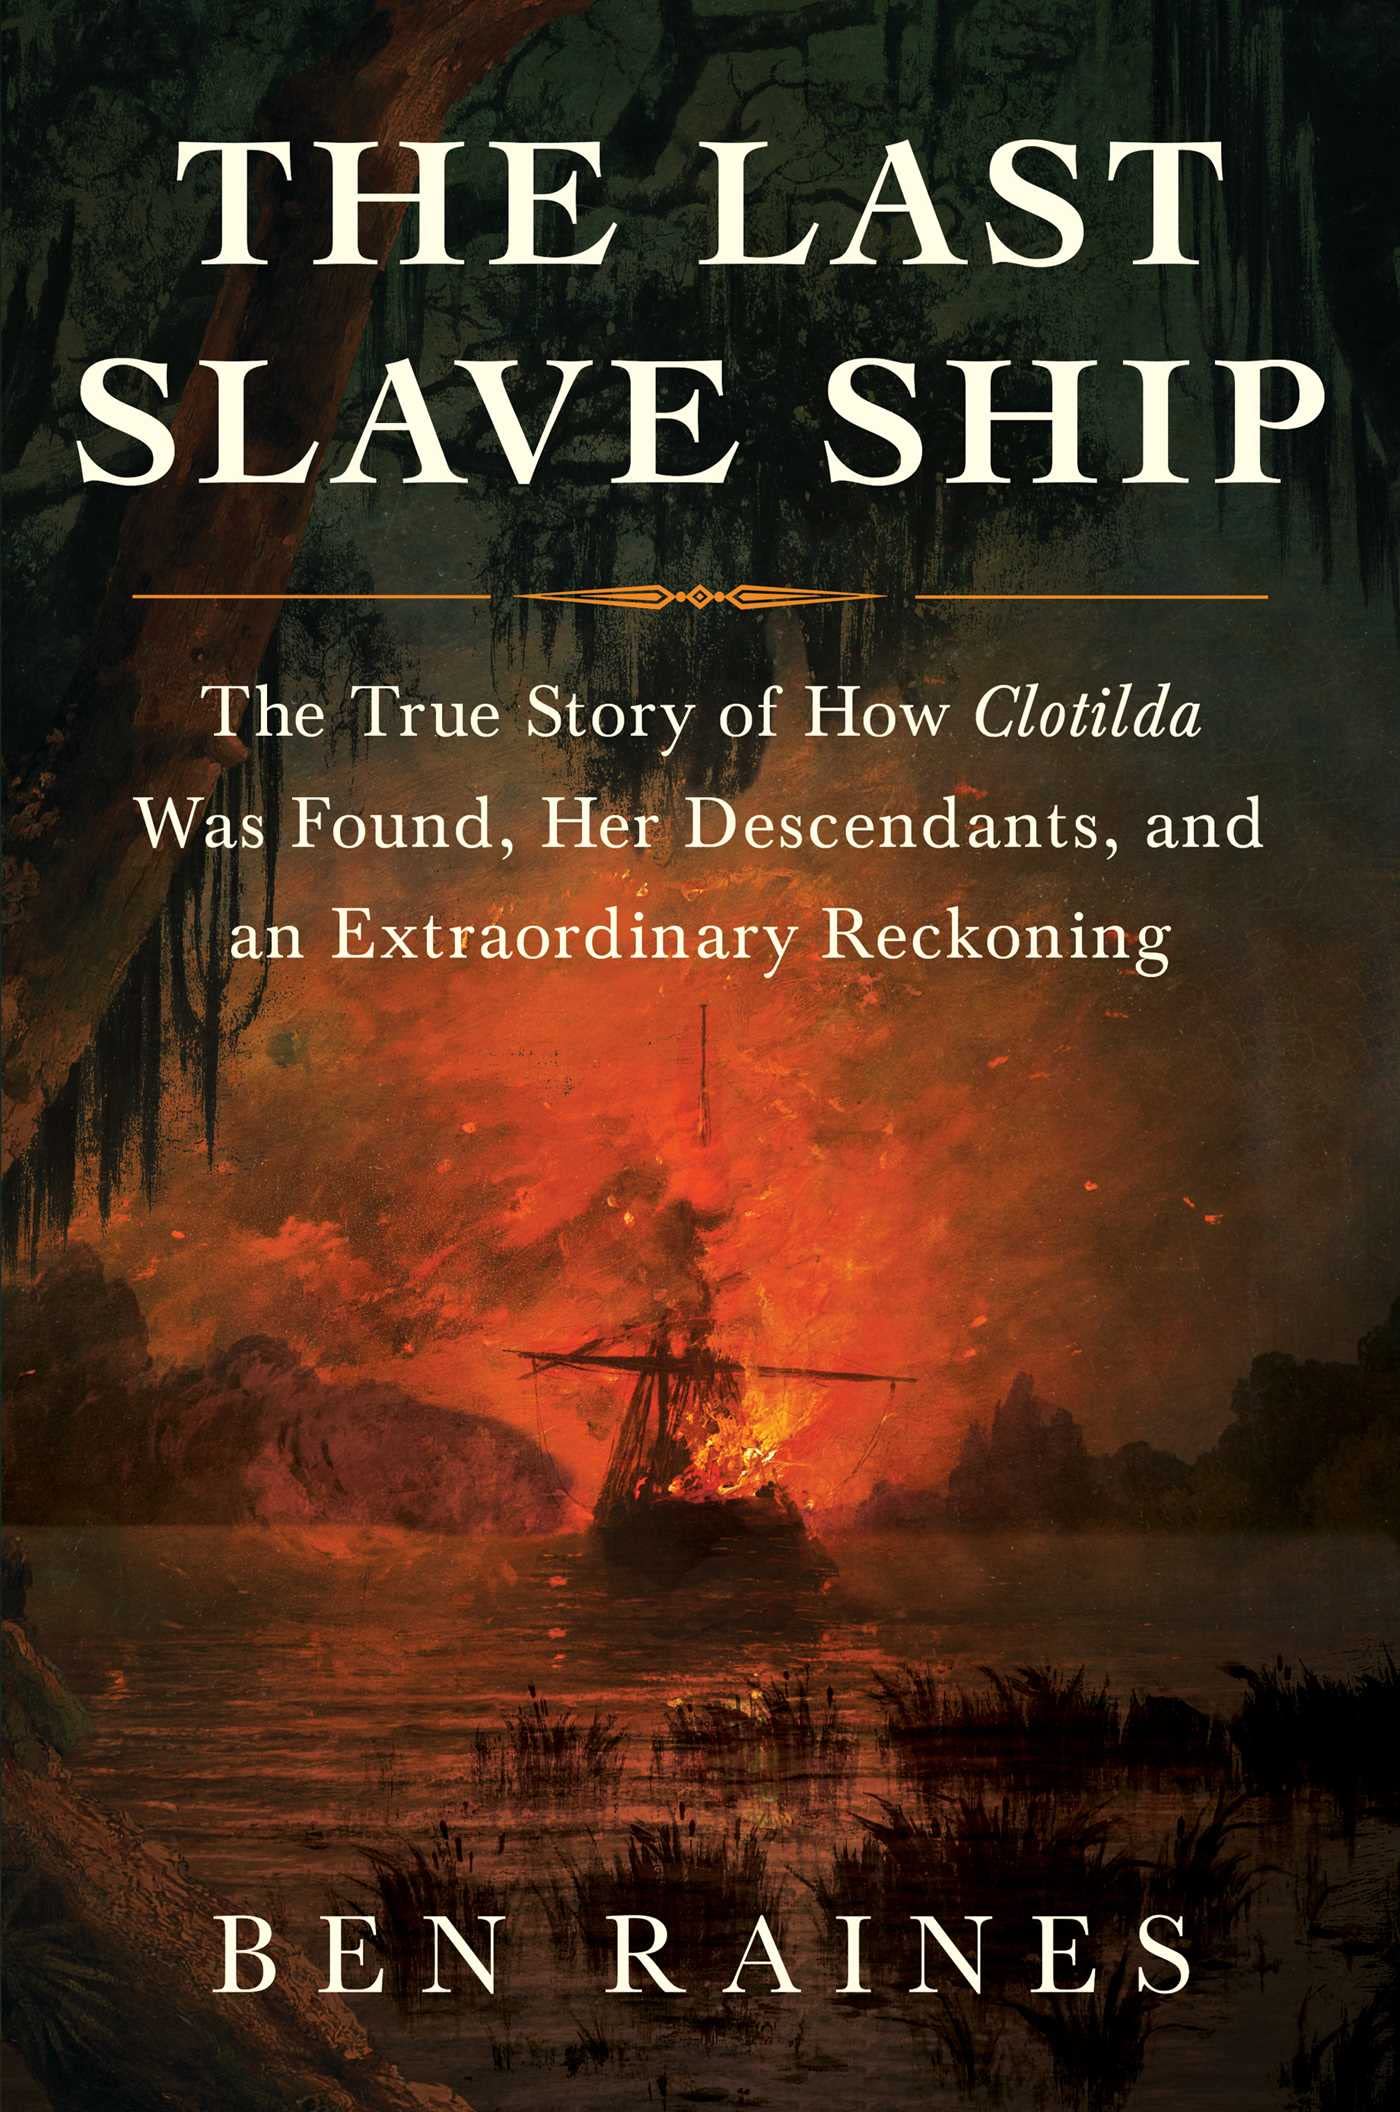 Image for "The Last Slave Ship"